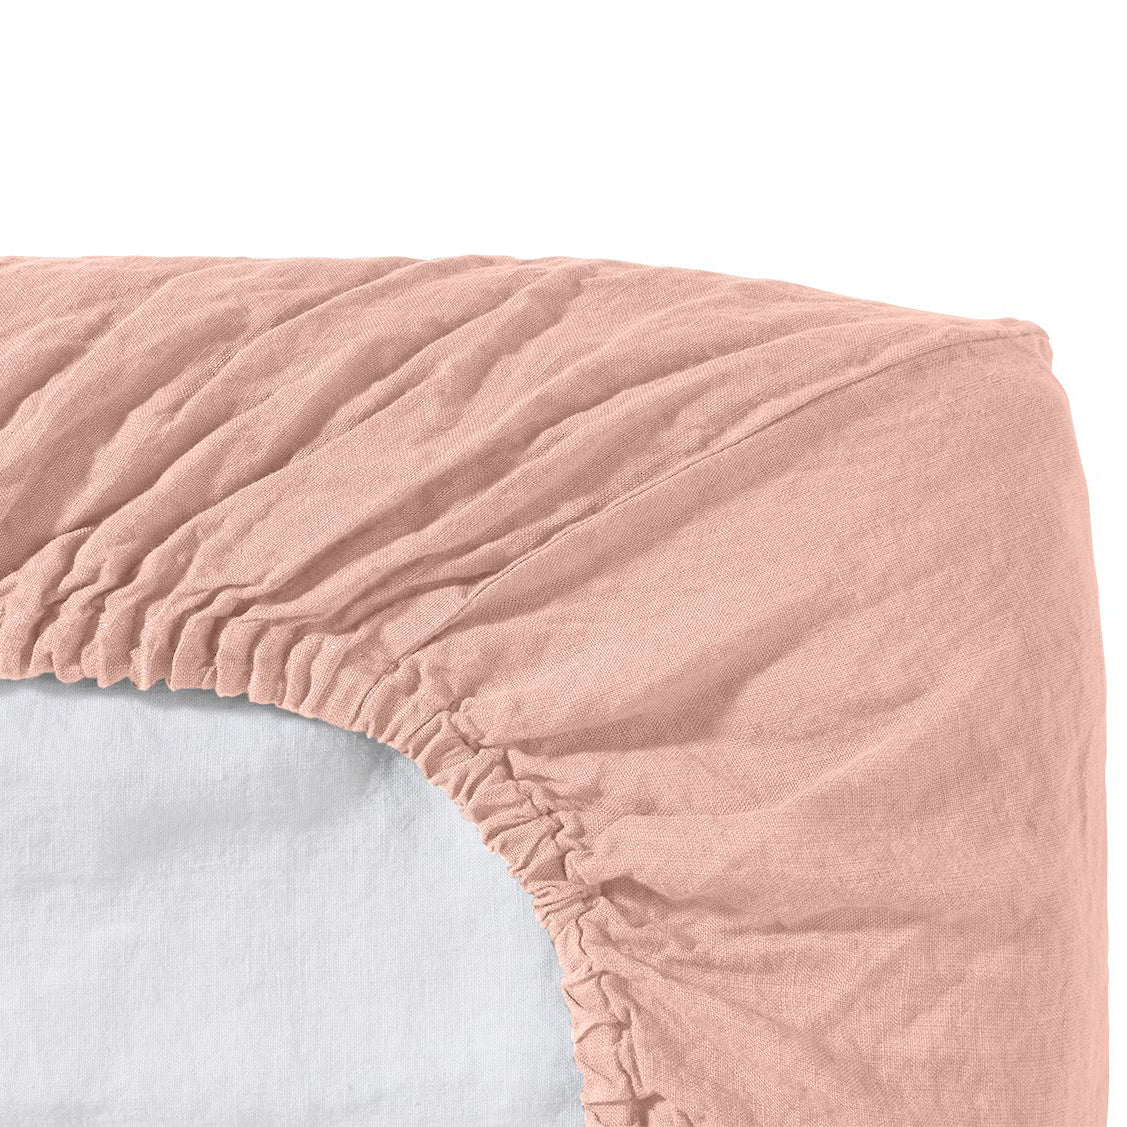 Fitted Sheets Linen - Nude